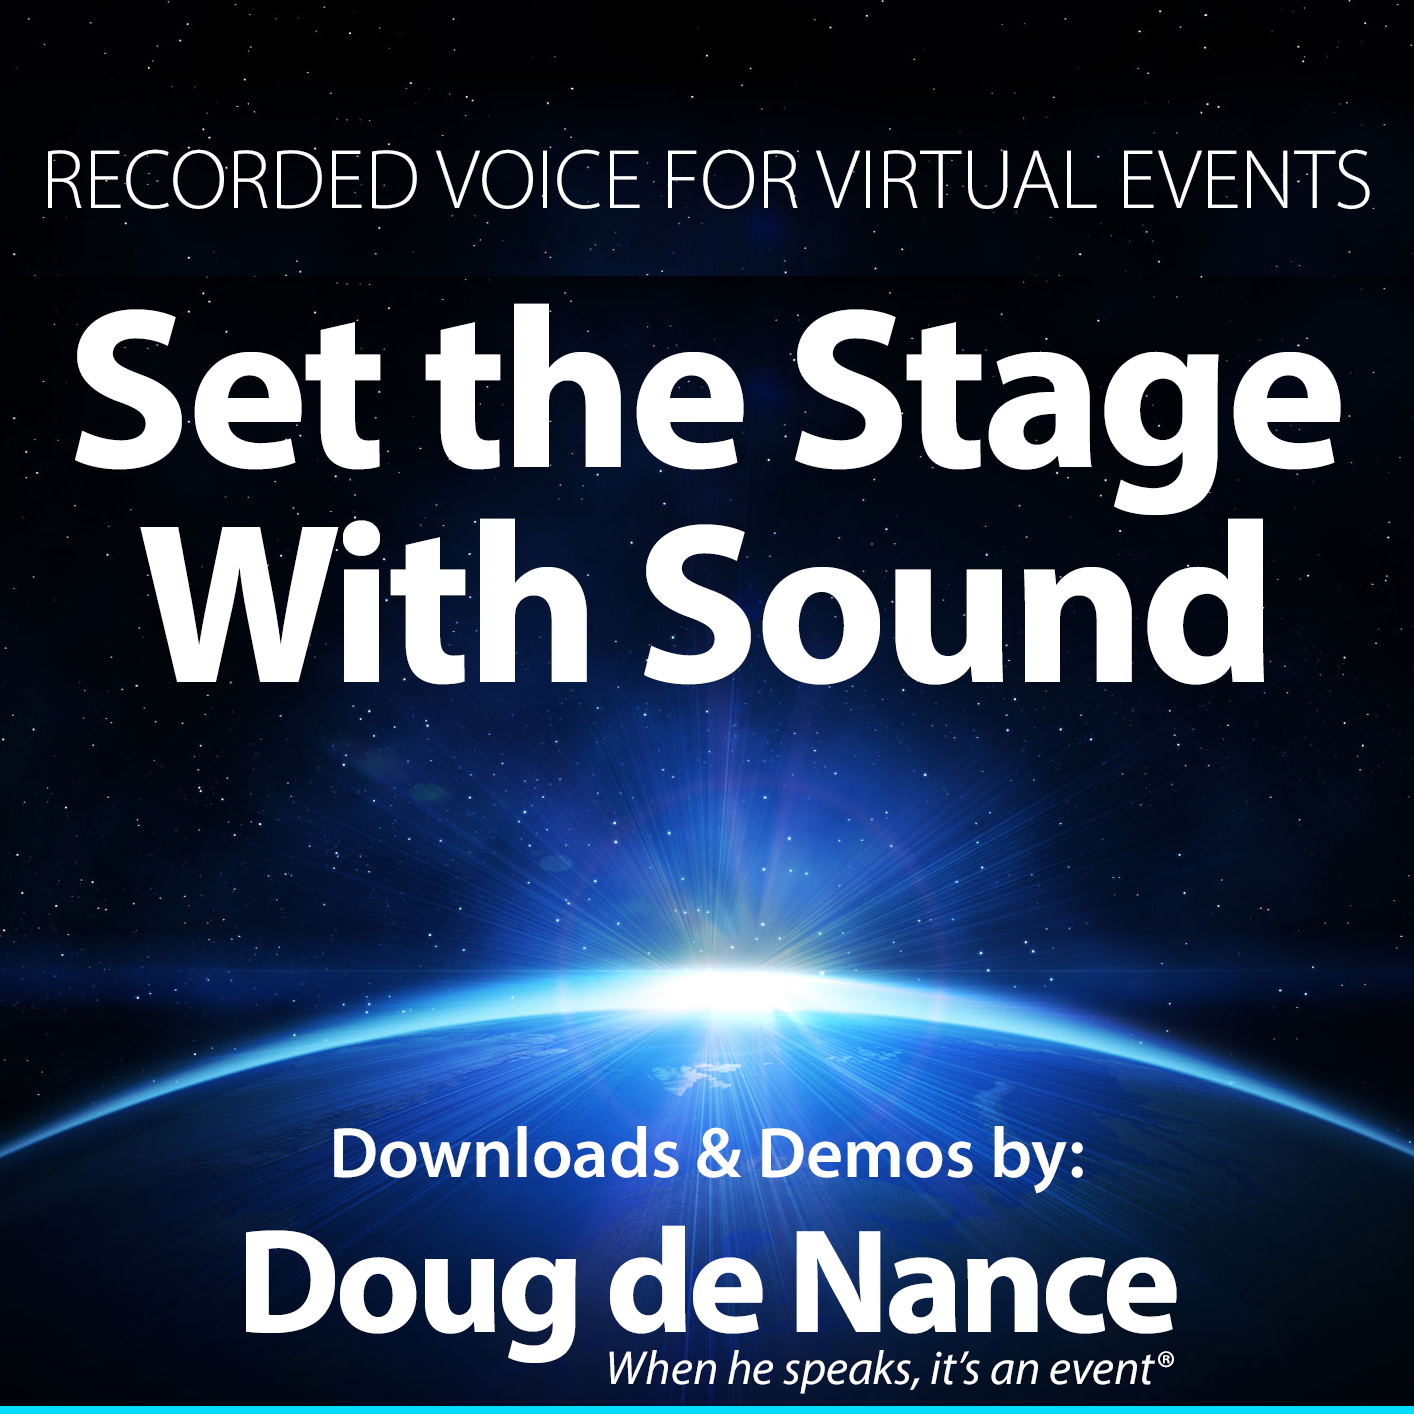 Set the stage with sound